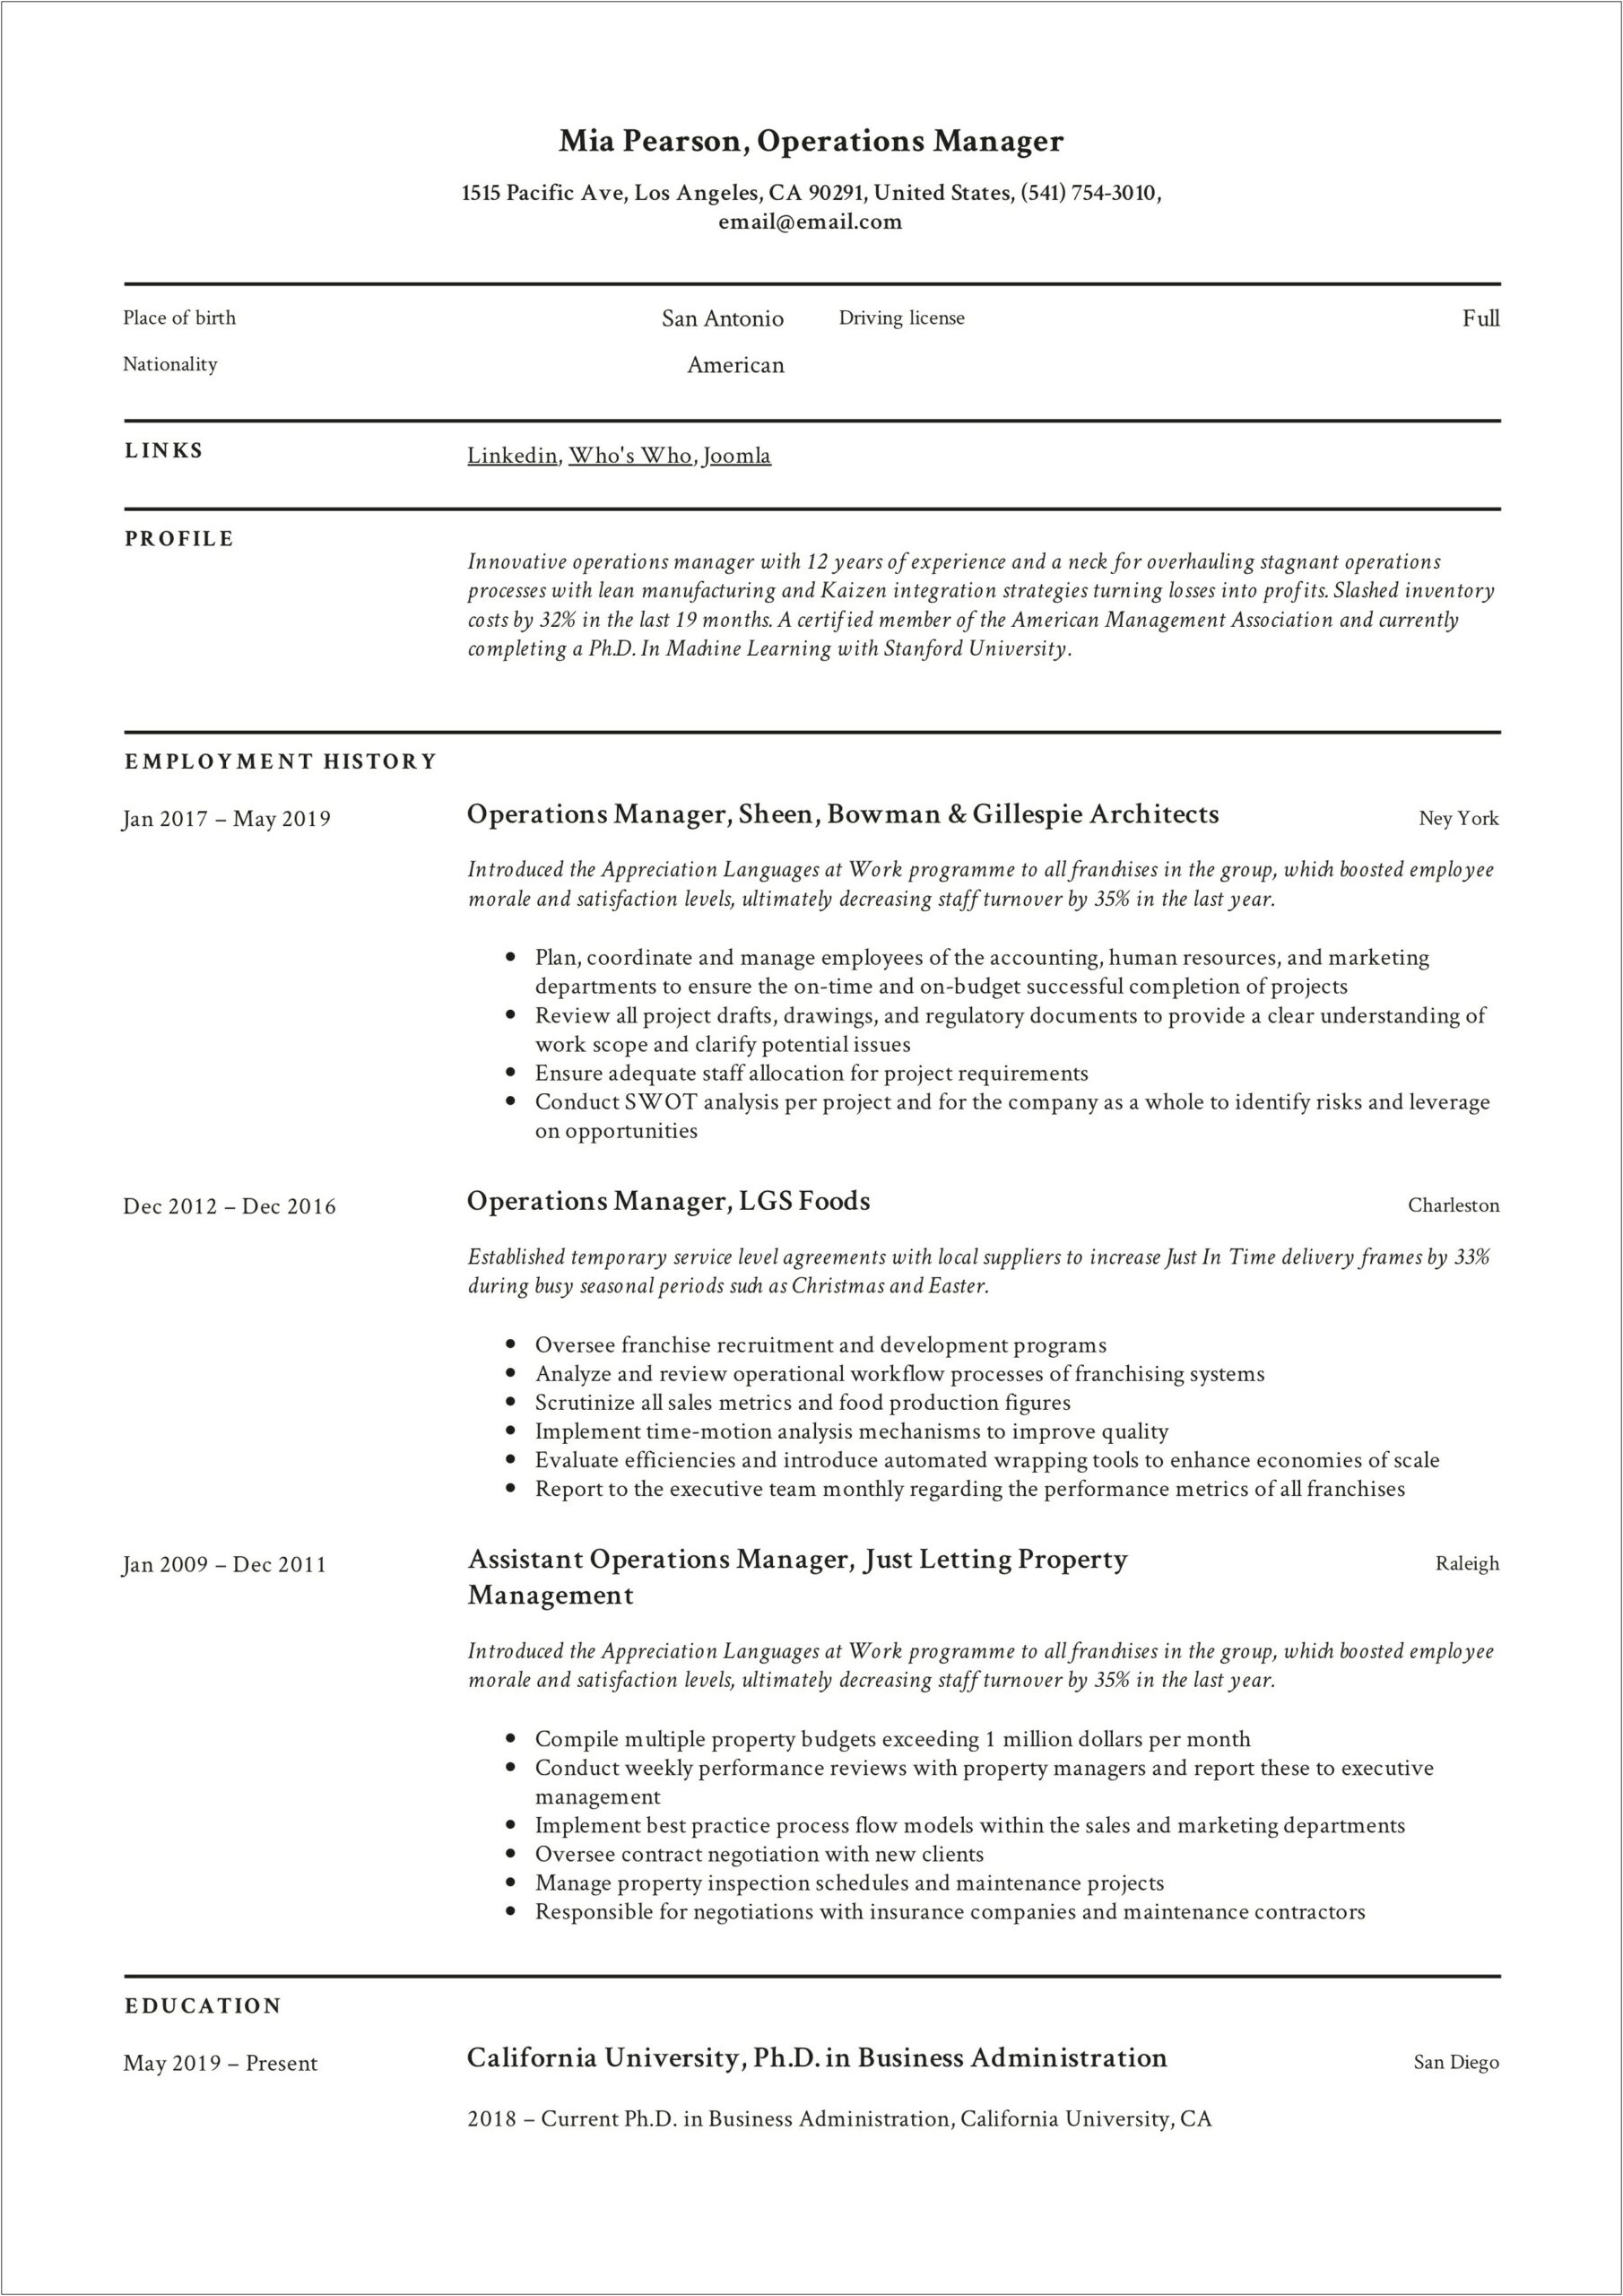 Resume For An Operations Manager